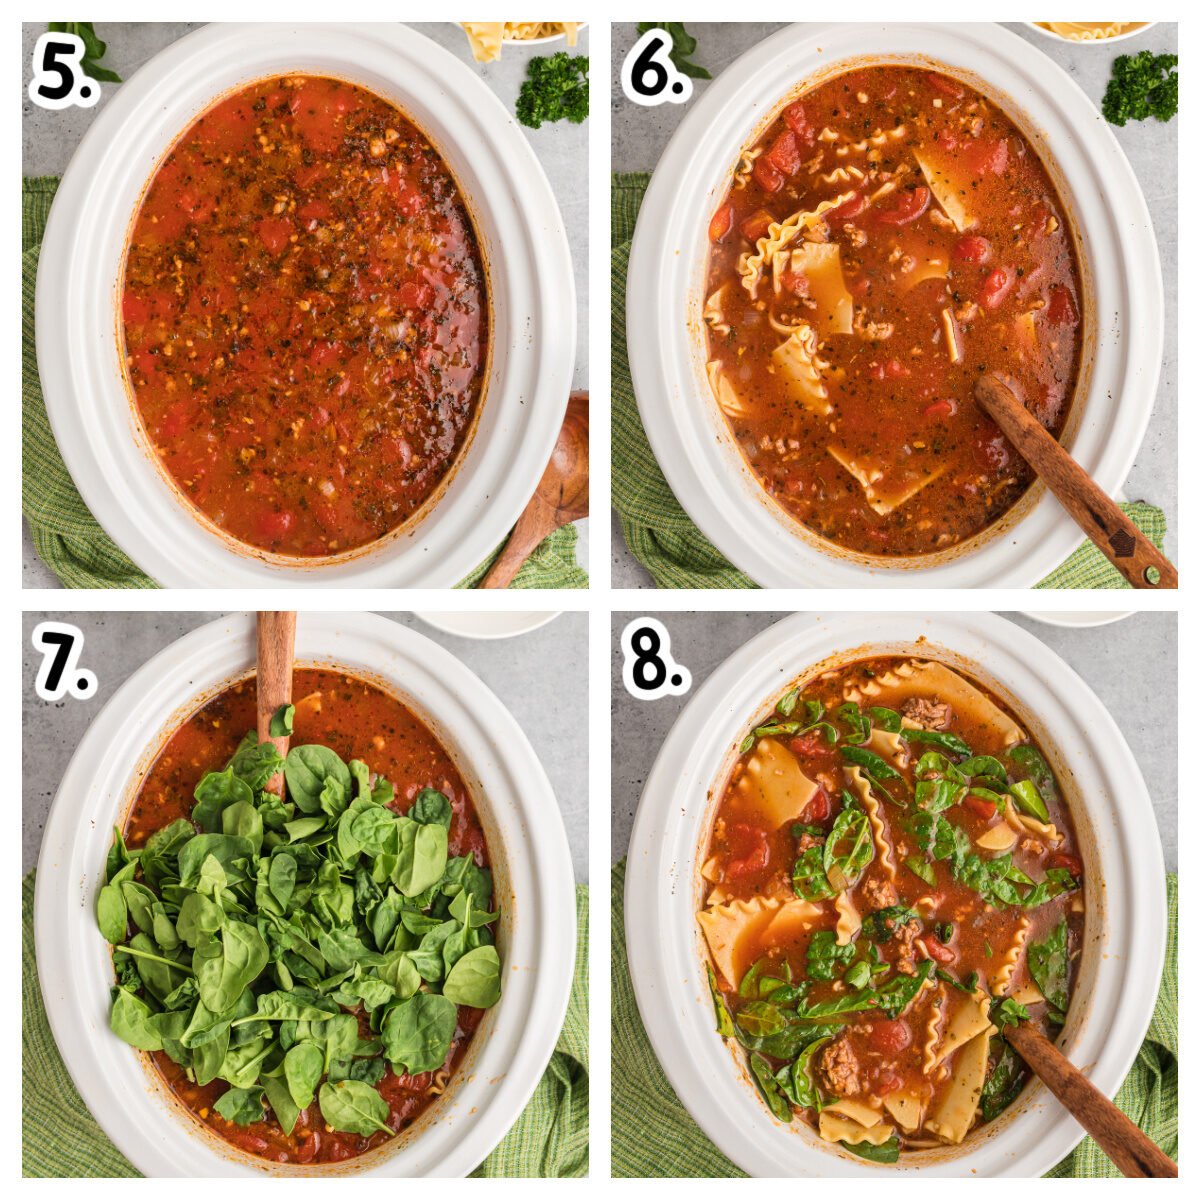 4 images about how to add lasagna noodles and spinach to slow cooker lasagna soup.